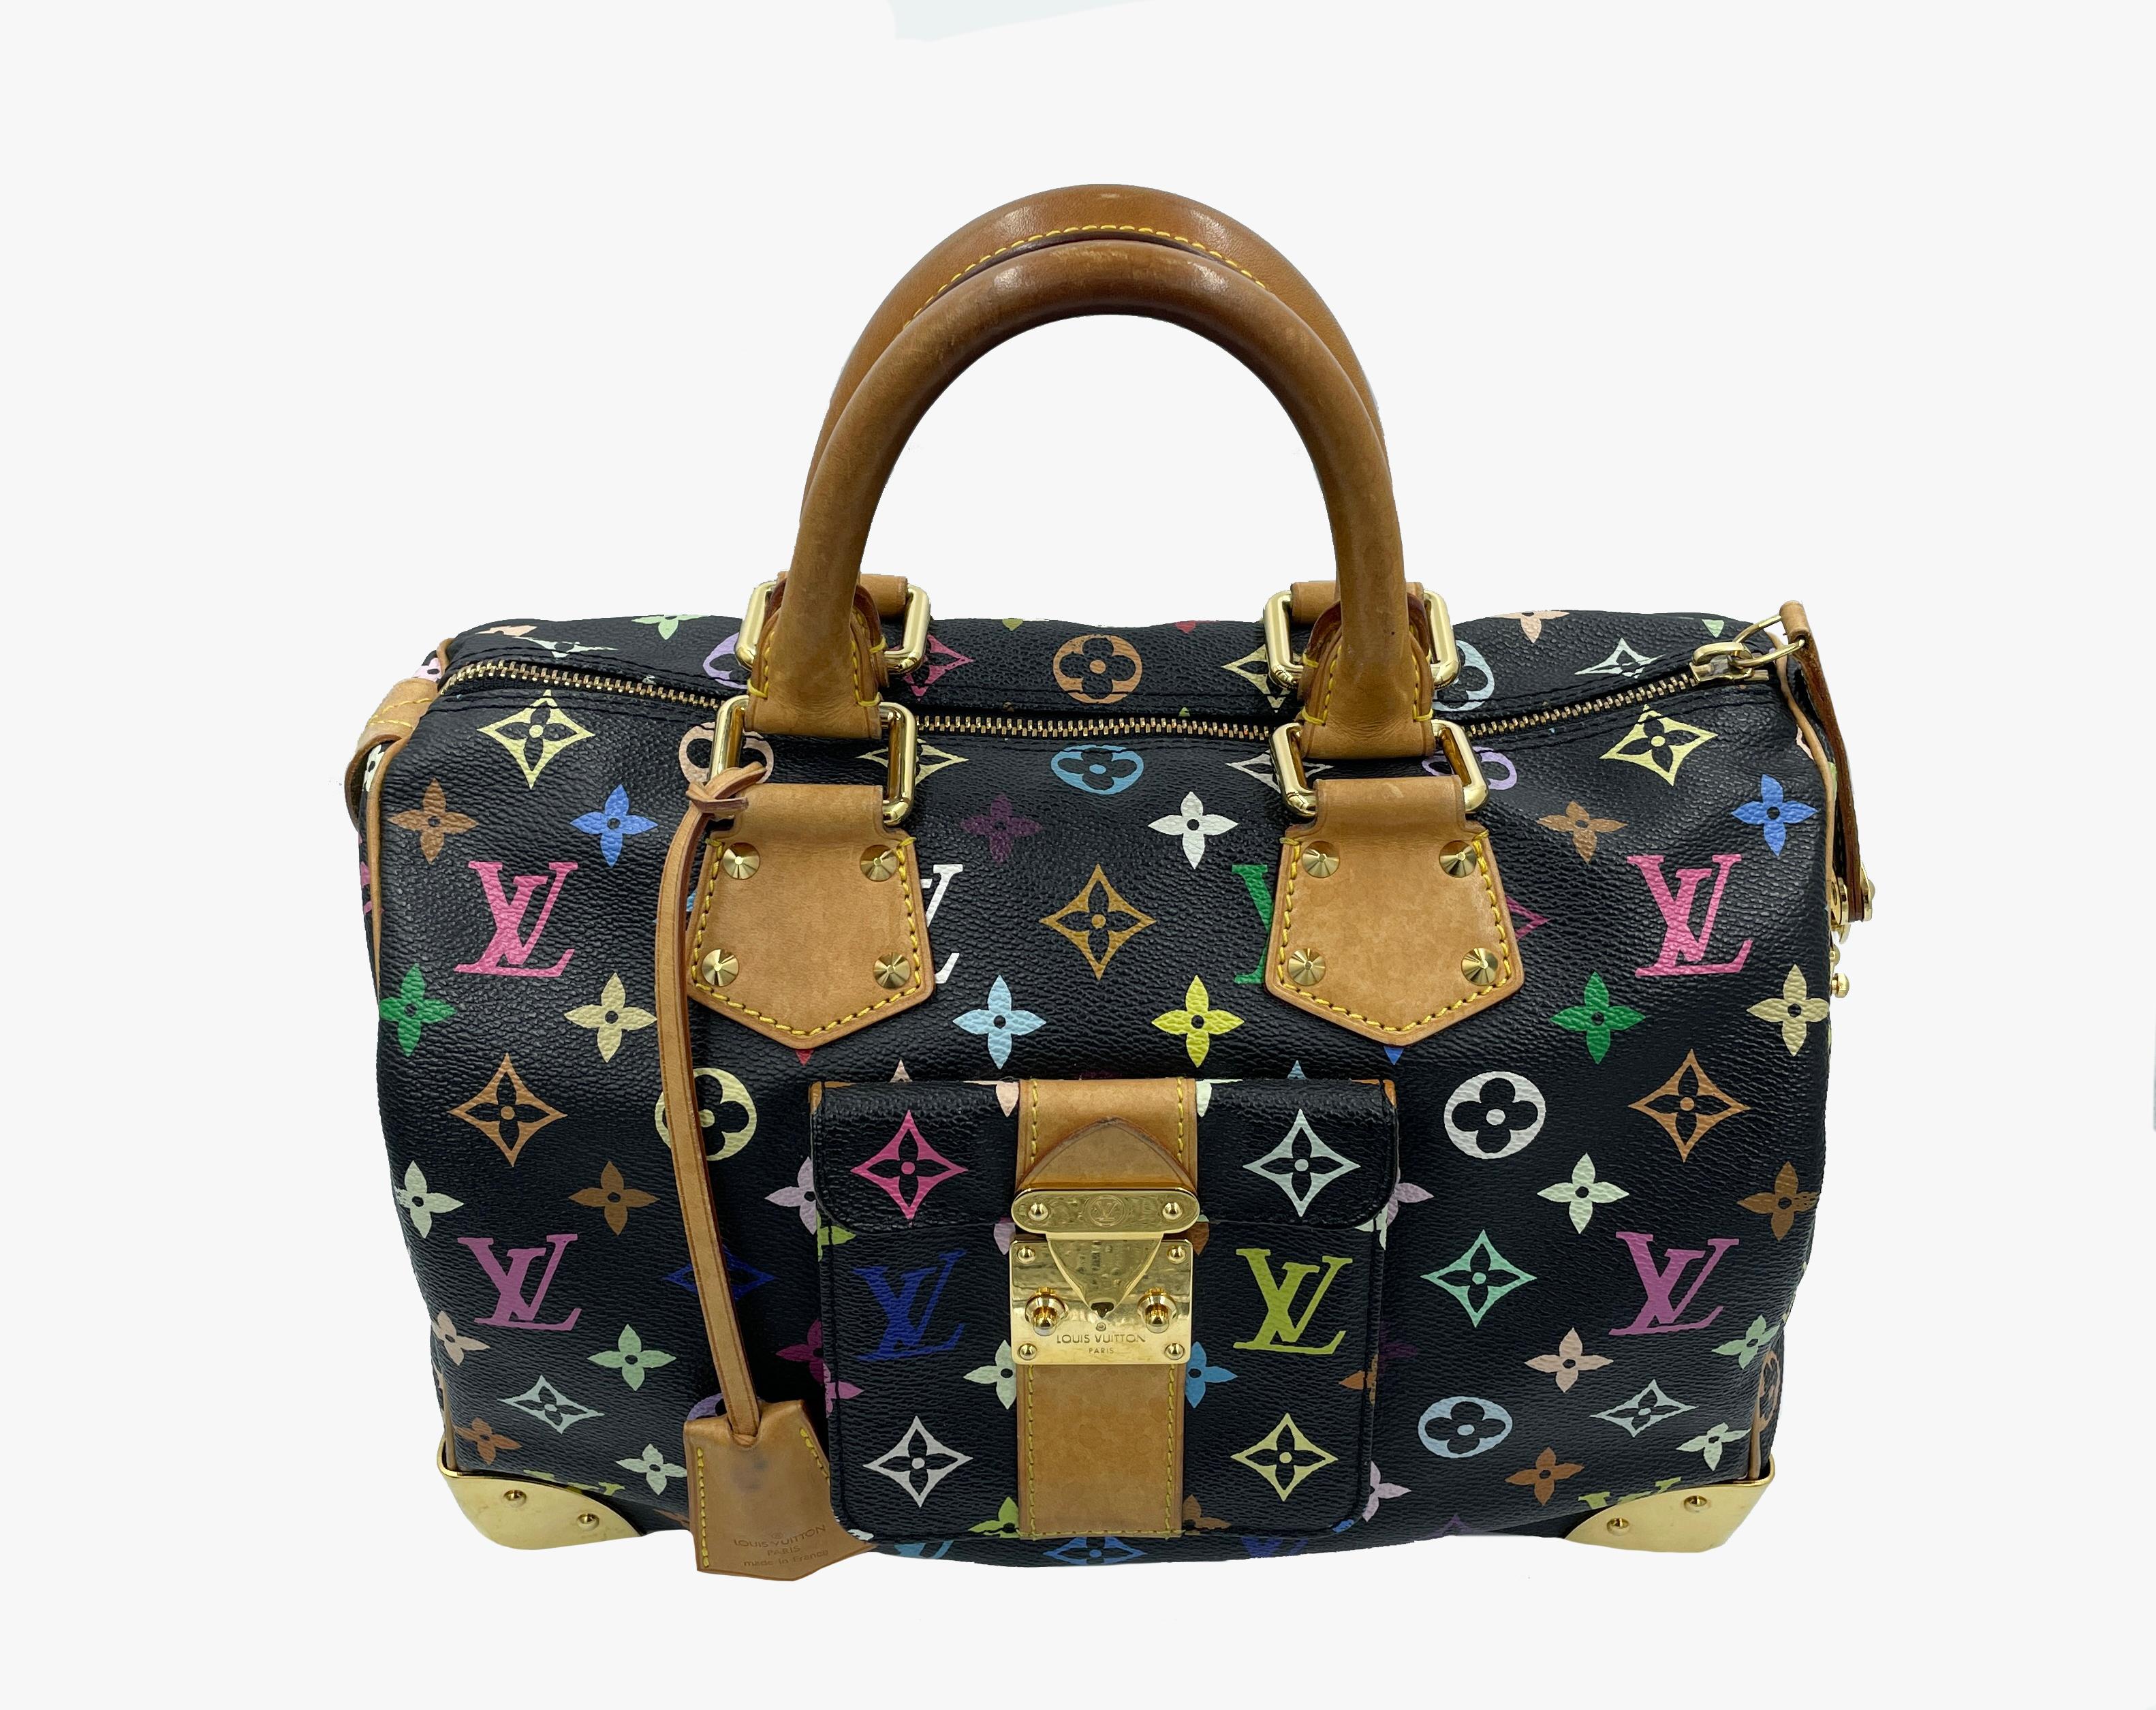 Vintage Louis Vuitton limited edition monogram bag. Created in collaboration with Takashi Murakami. 
Material: coated canvas
Lining: fabric. 
Date code: 
Condition: very good. 
Measurements:
bottom - 31x17.5 cm
height - 20.5 cm
handle height - 14.5